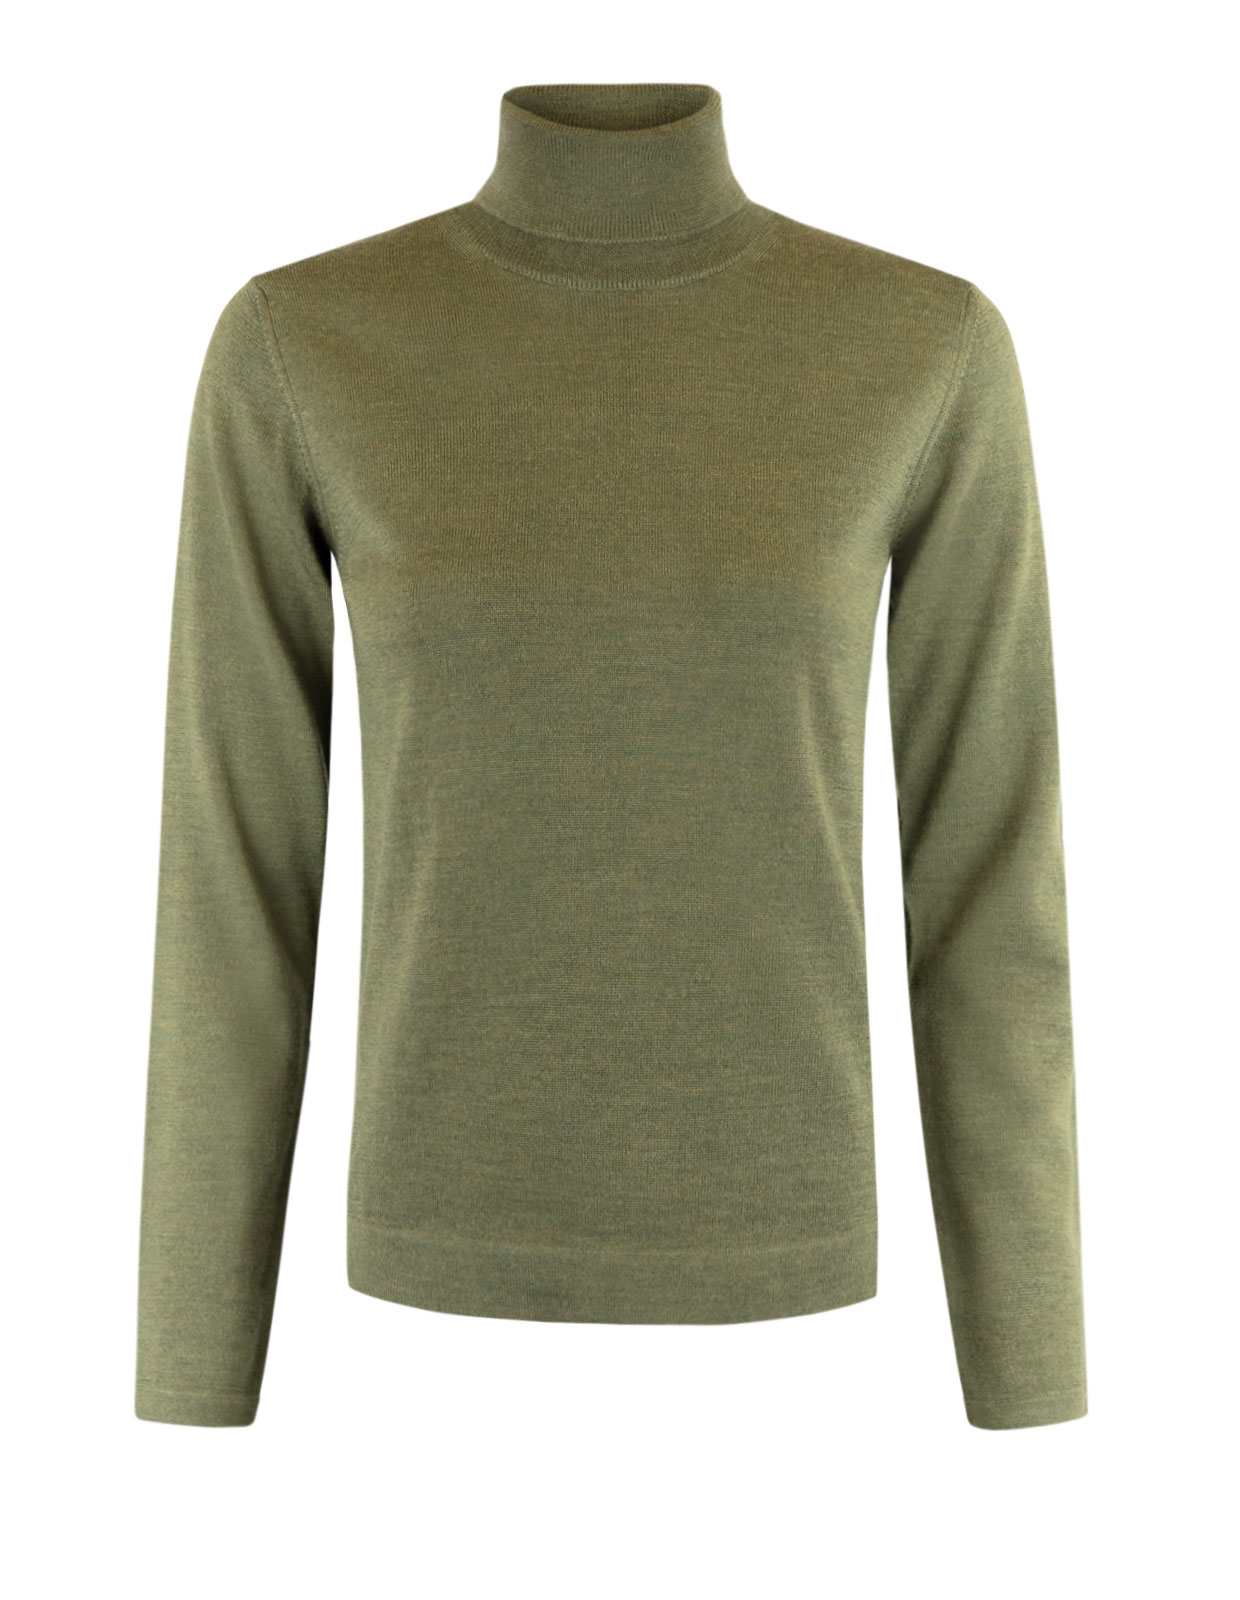 Turtle Neck Sweater Olive Green